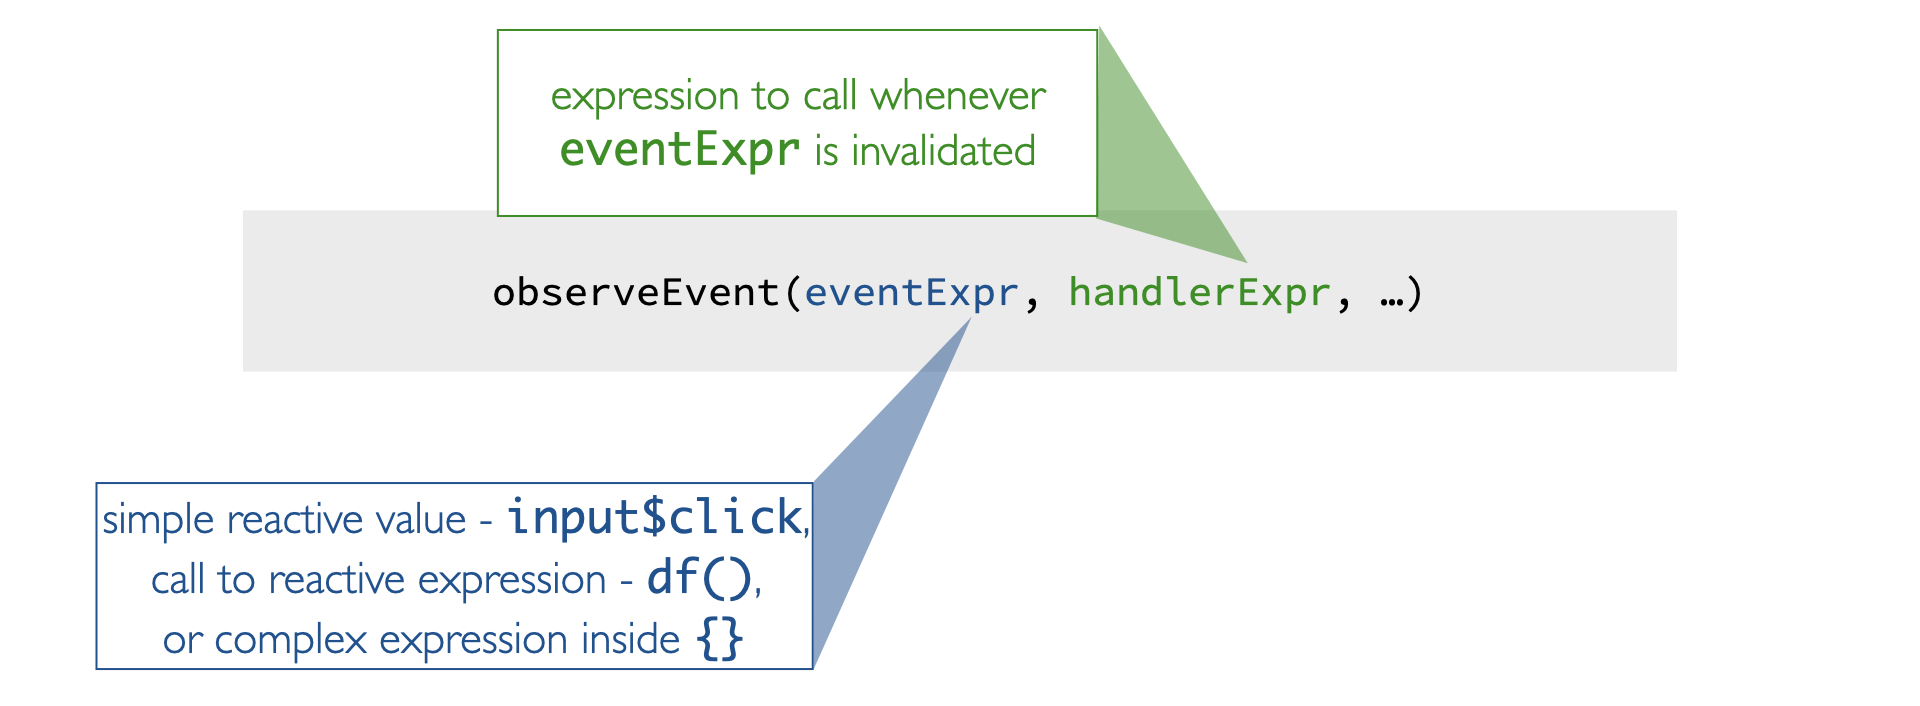 Code line 'observeEvent(eventExpr, handlerExpr, ...)'. 'eventExpr' is described as 'simple reactive value - input$click, call to reactive expression - df(), or complex expression inside {}'. 'handlerExpr' is described as 'expression to call whenever eventExpr is invalidated'.